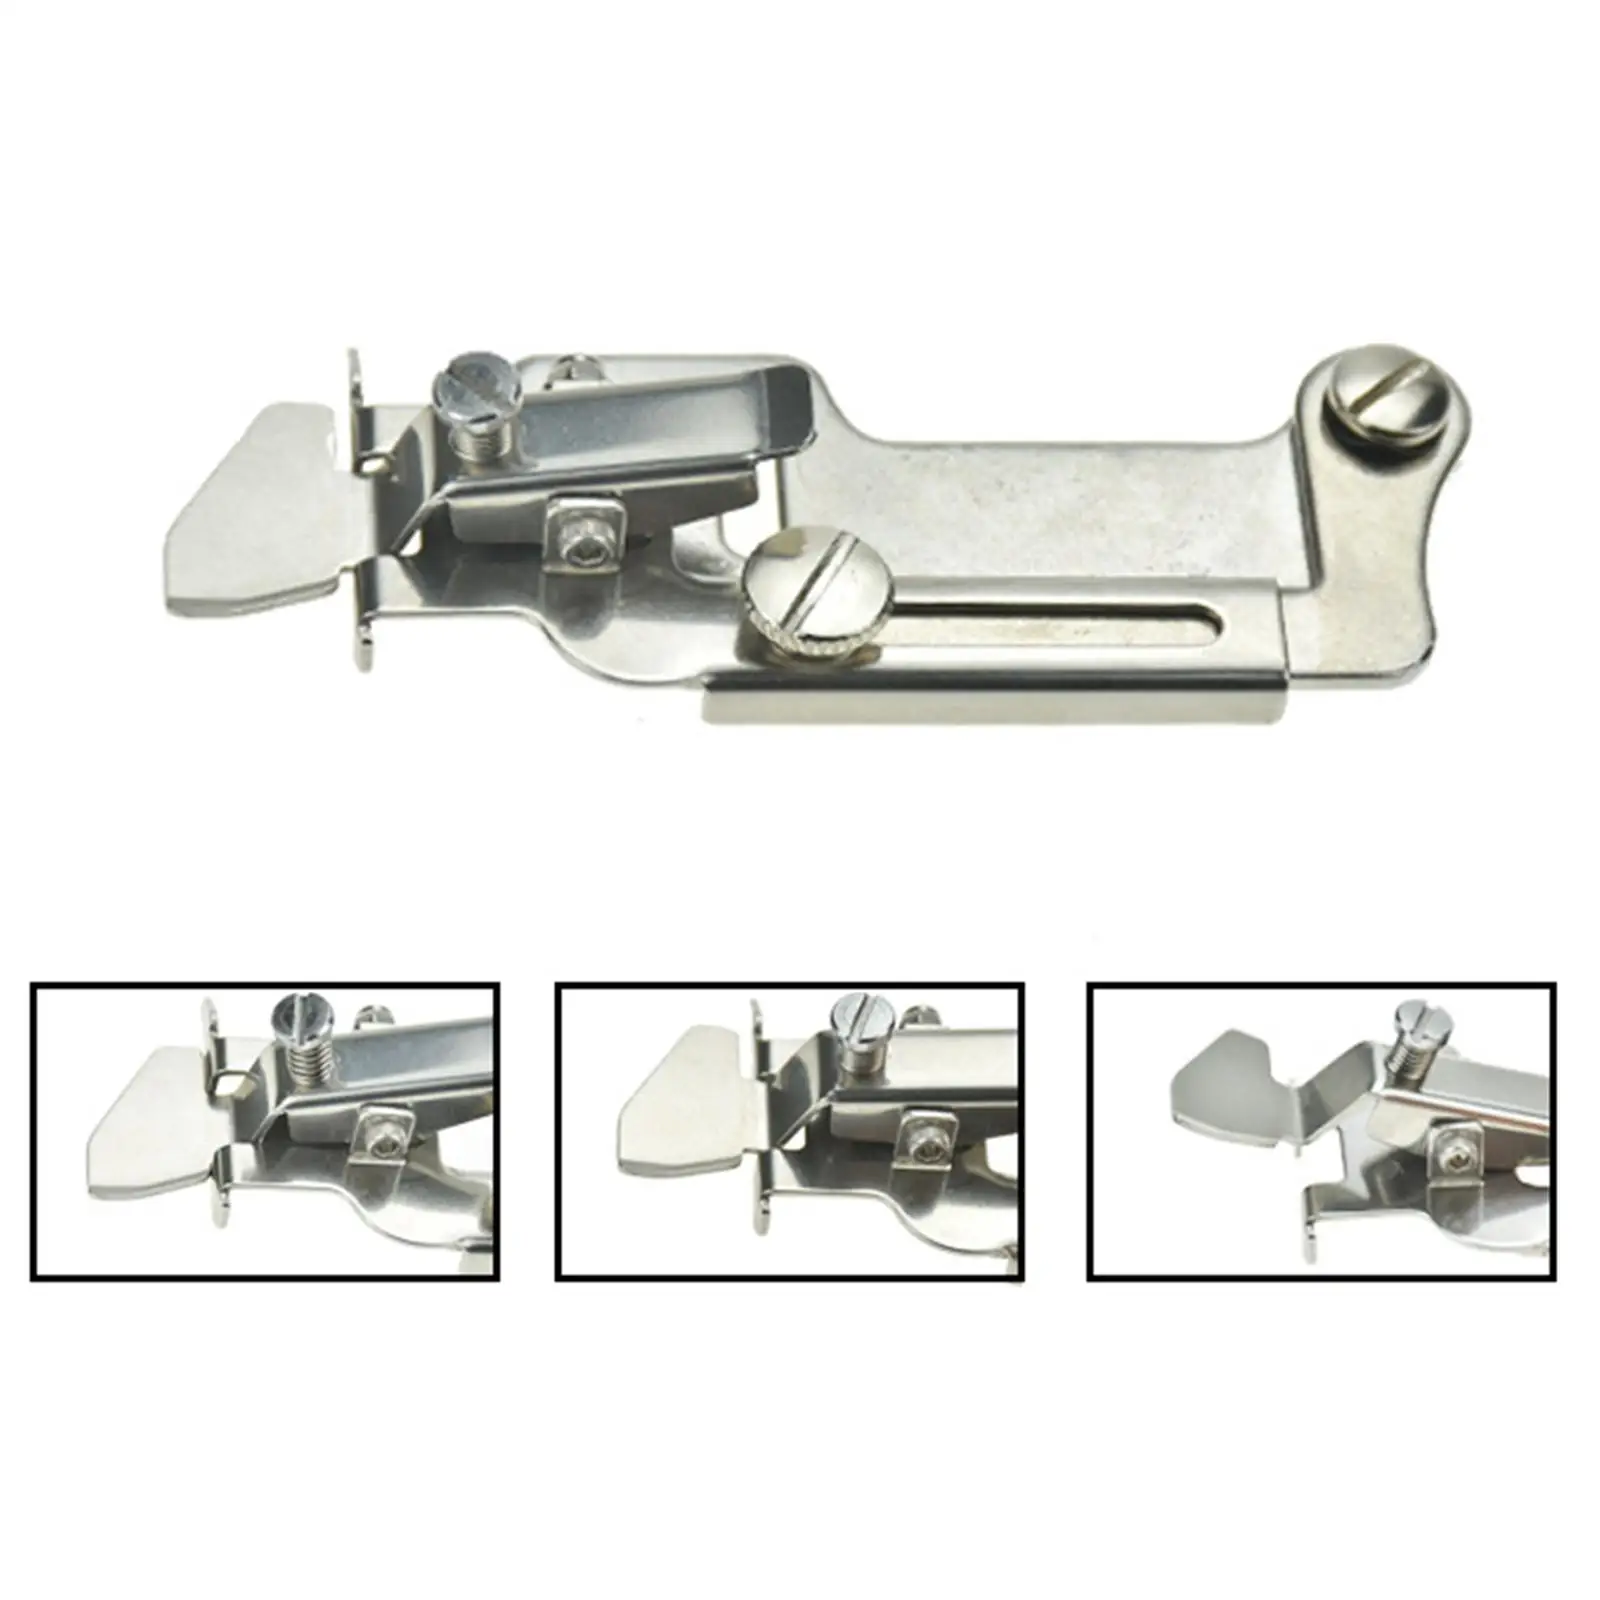 Sewing Machine Seam Guide Accs Iron Parts Hem Presser Foot Presser Replacement Attachment Tool Anti Curling Device for Household